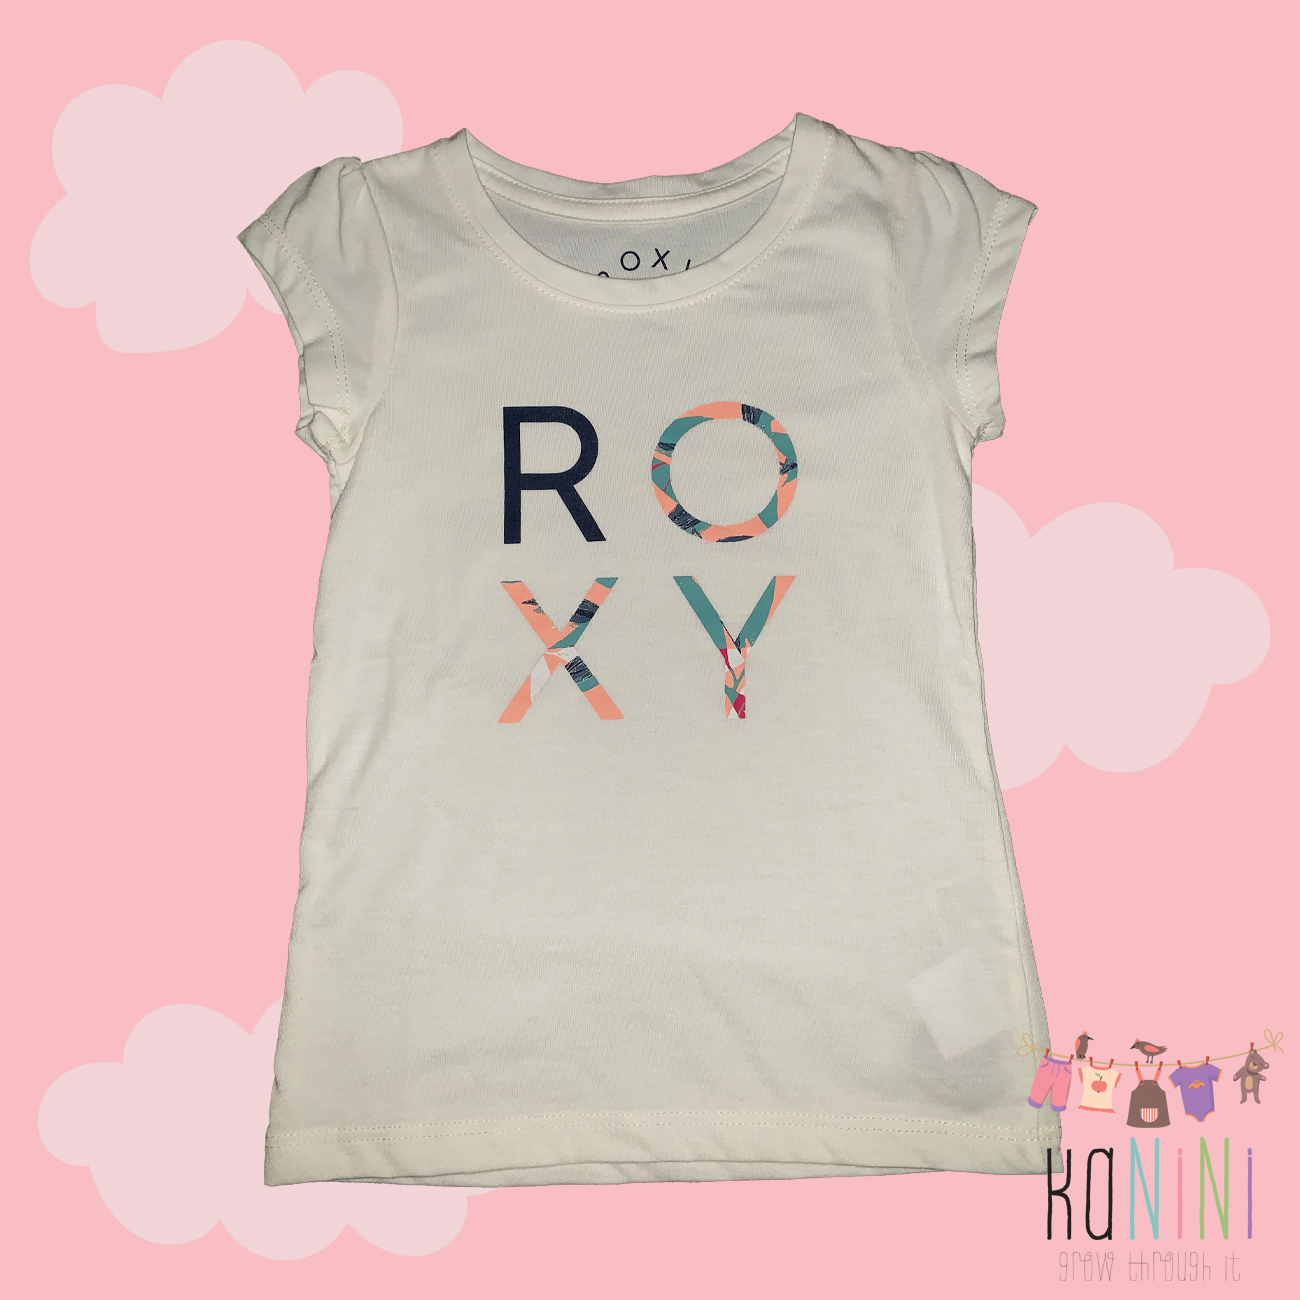 Featured image for “Roxy 3 Years Girls White T-Shirt”